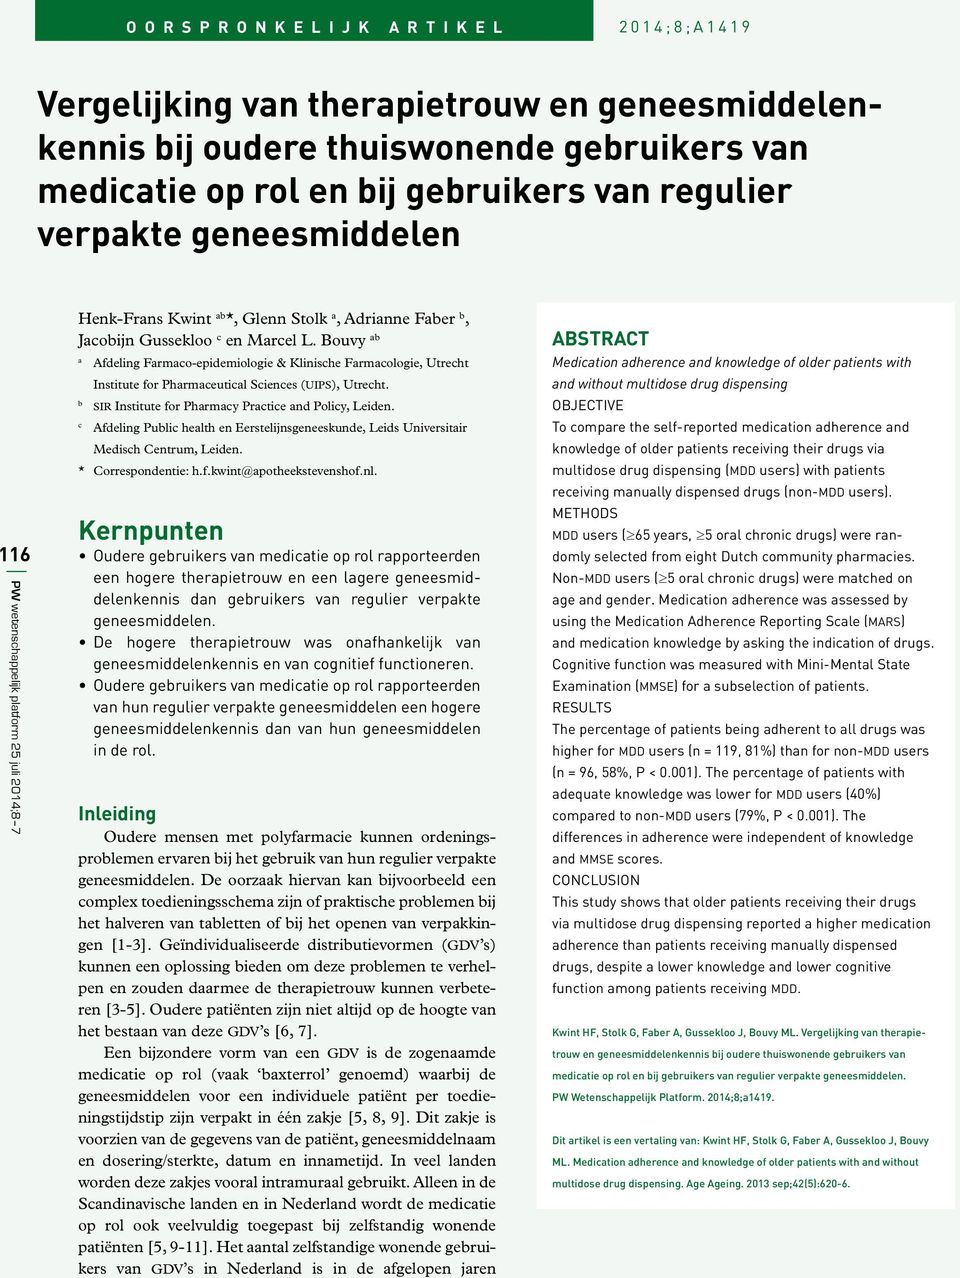 Bouvy ab a Afdeling Farmaco-epidemiologie & Klinische Farmacologie, Utrecht Institute for Pharmaceutical Sciences (uips), Utrecht. b sir Institute for Pharmacy Practice and Policy, Leiden.